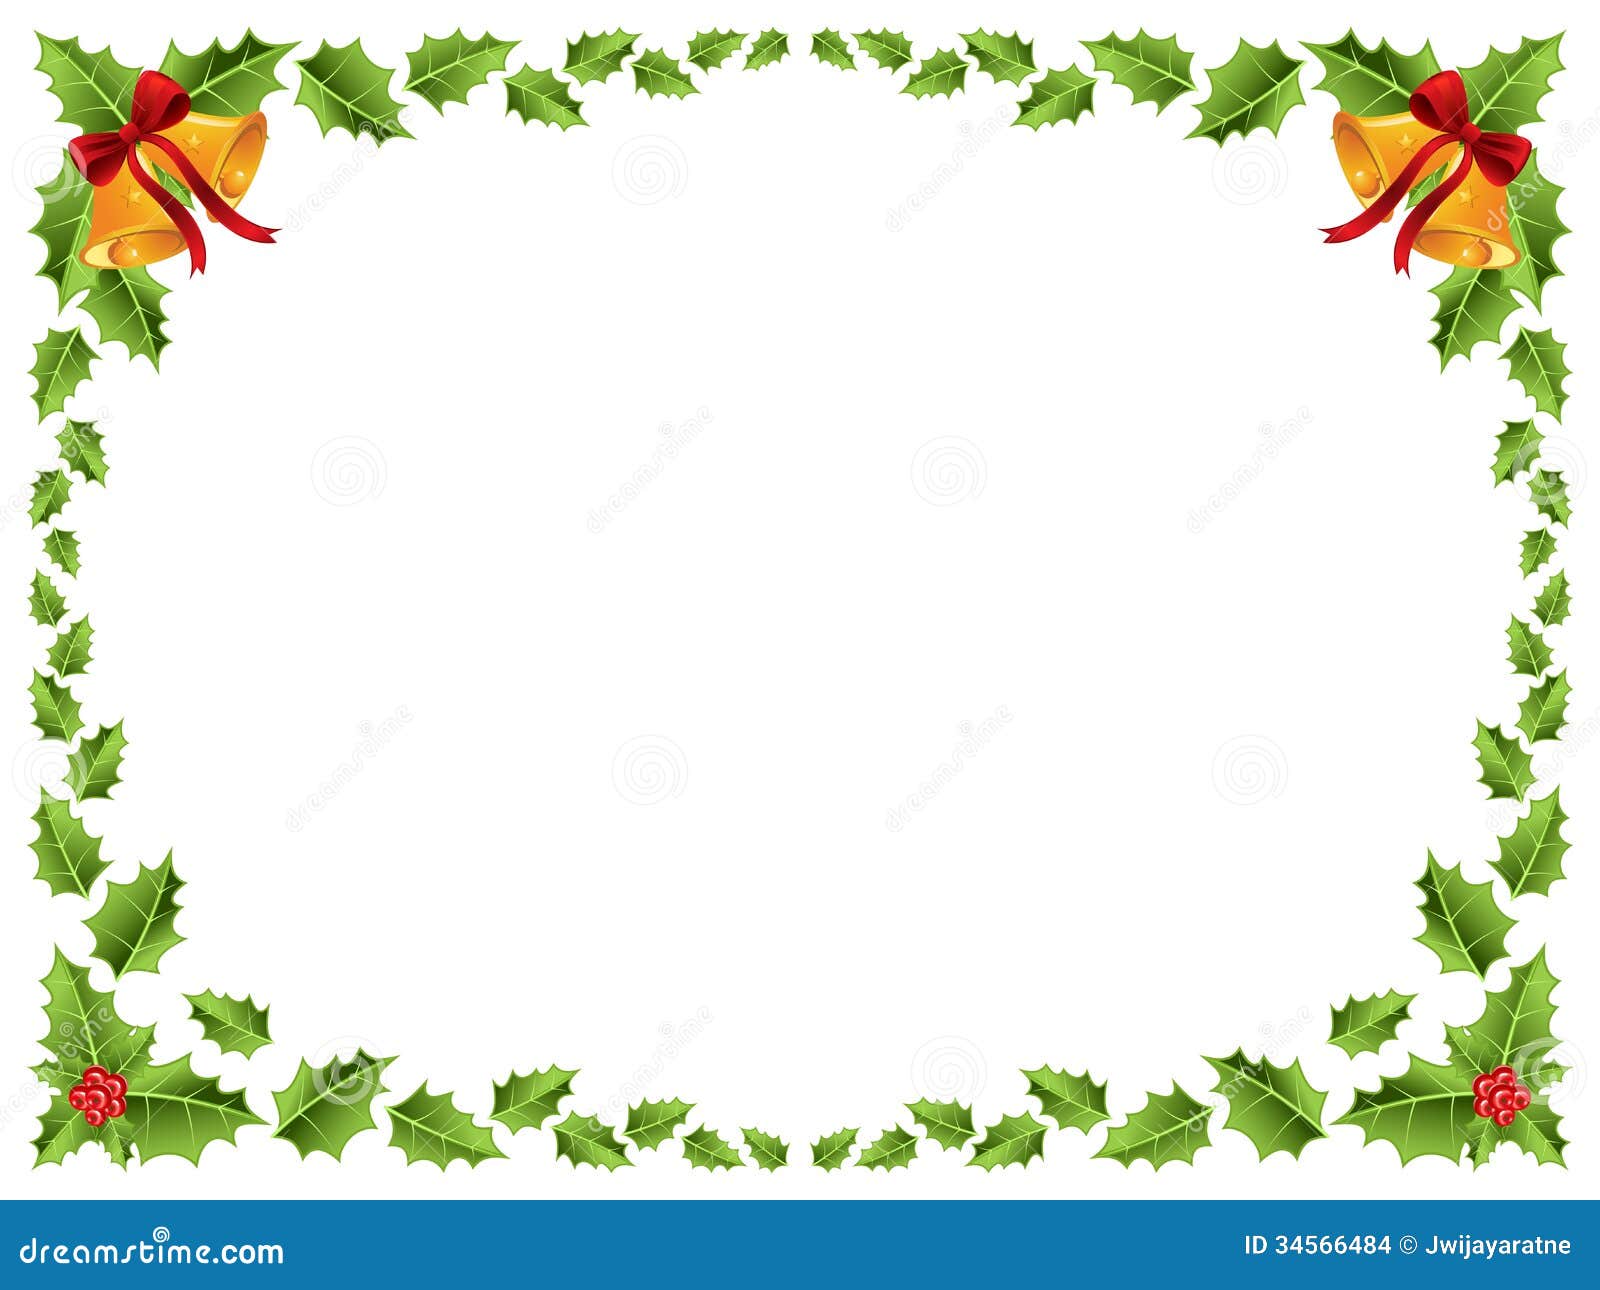 clipart christmas bells holly - photo #43